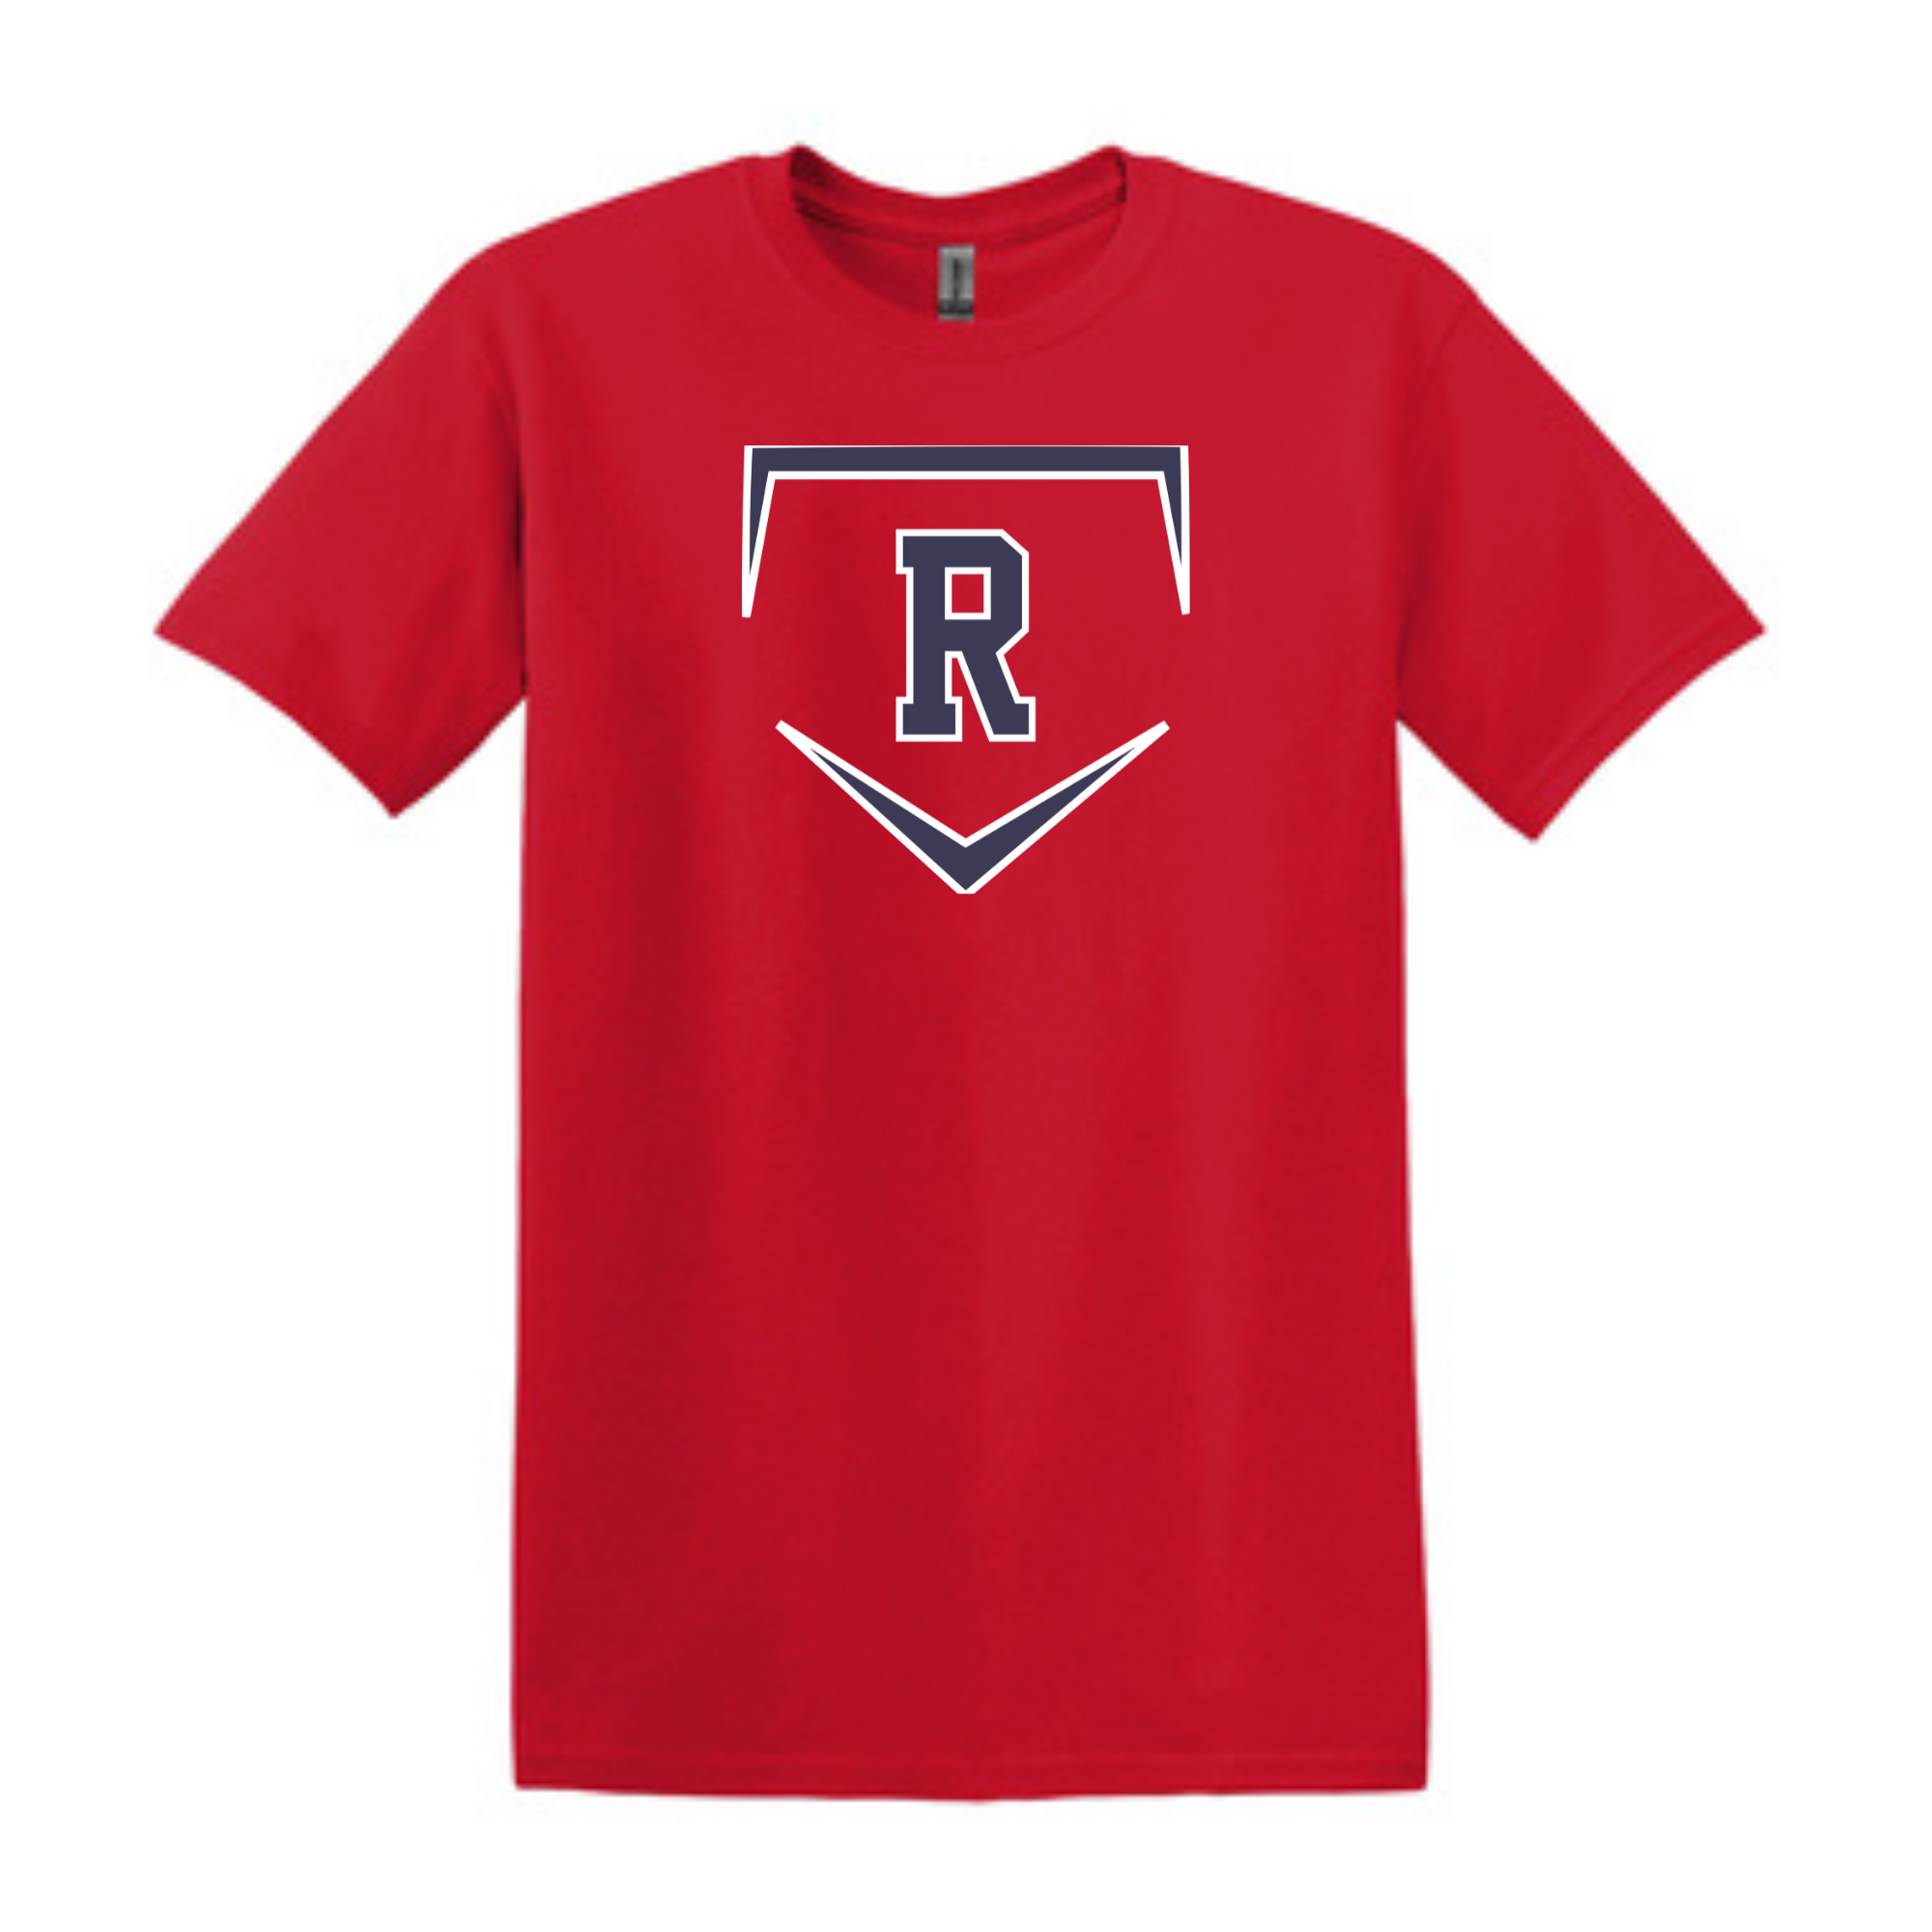 Rippers Home Plate Tee- 64000